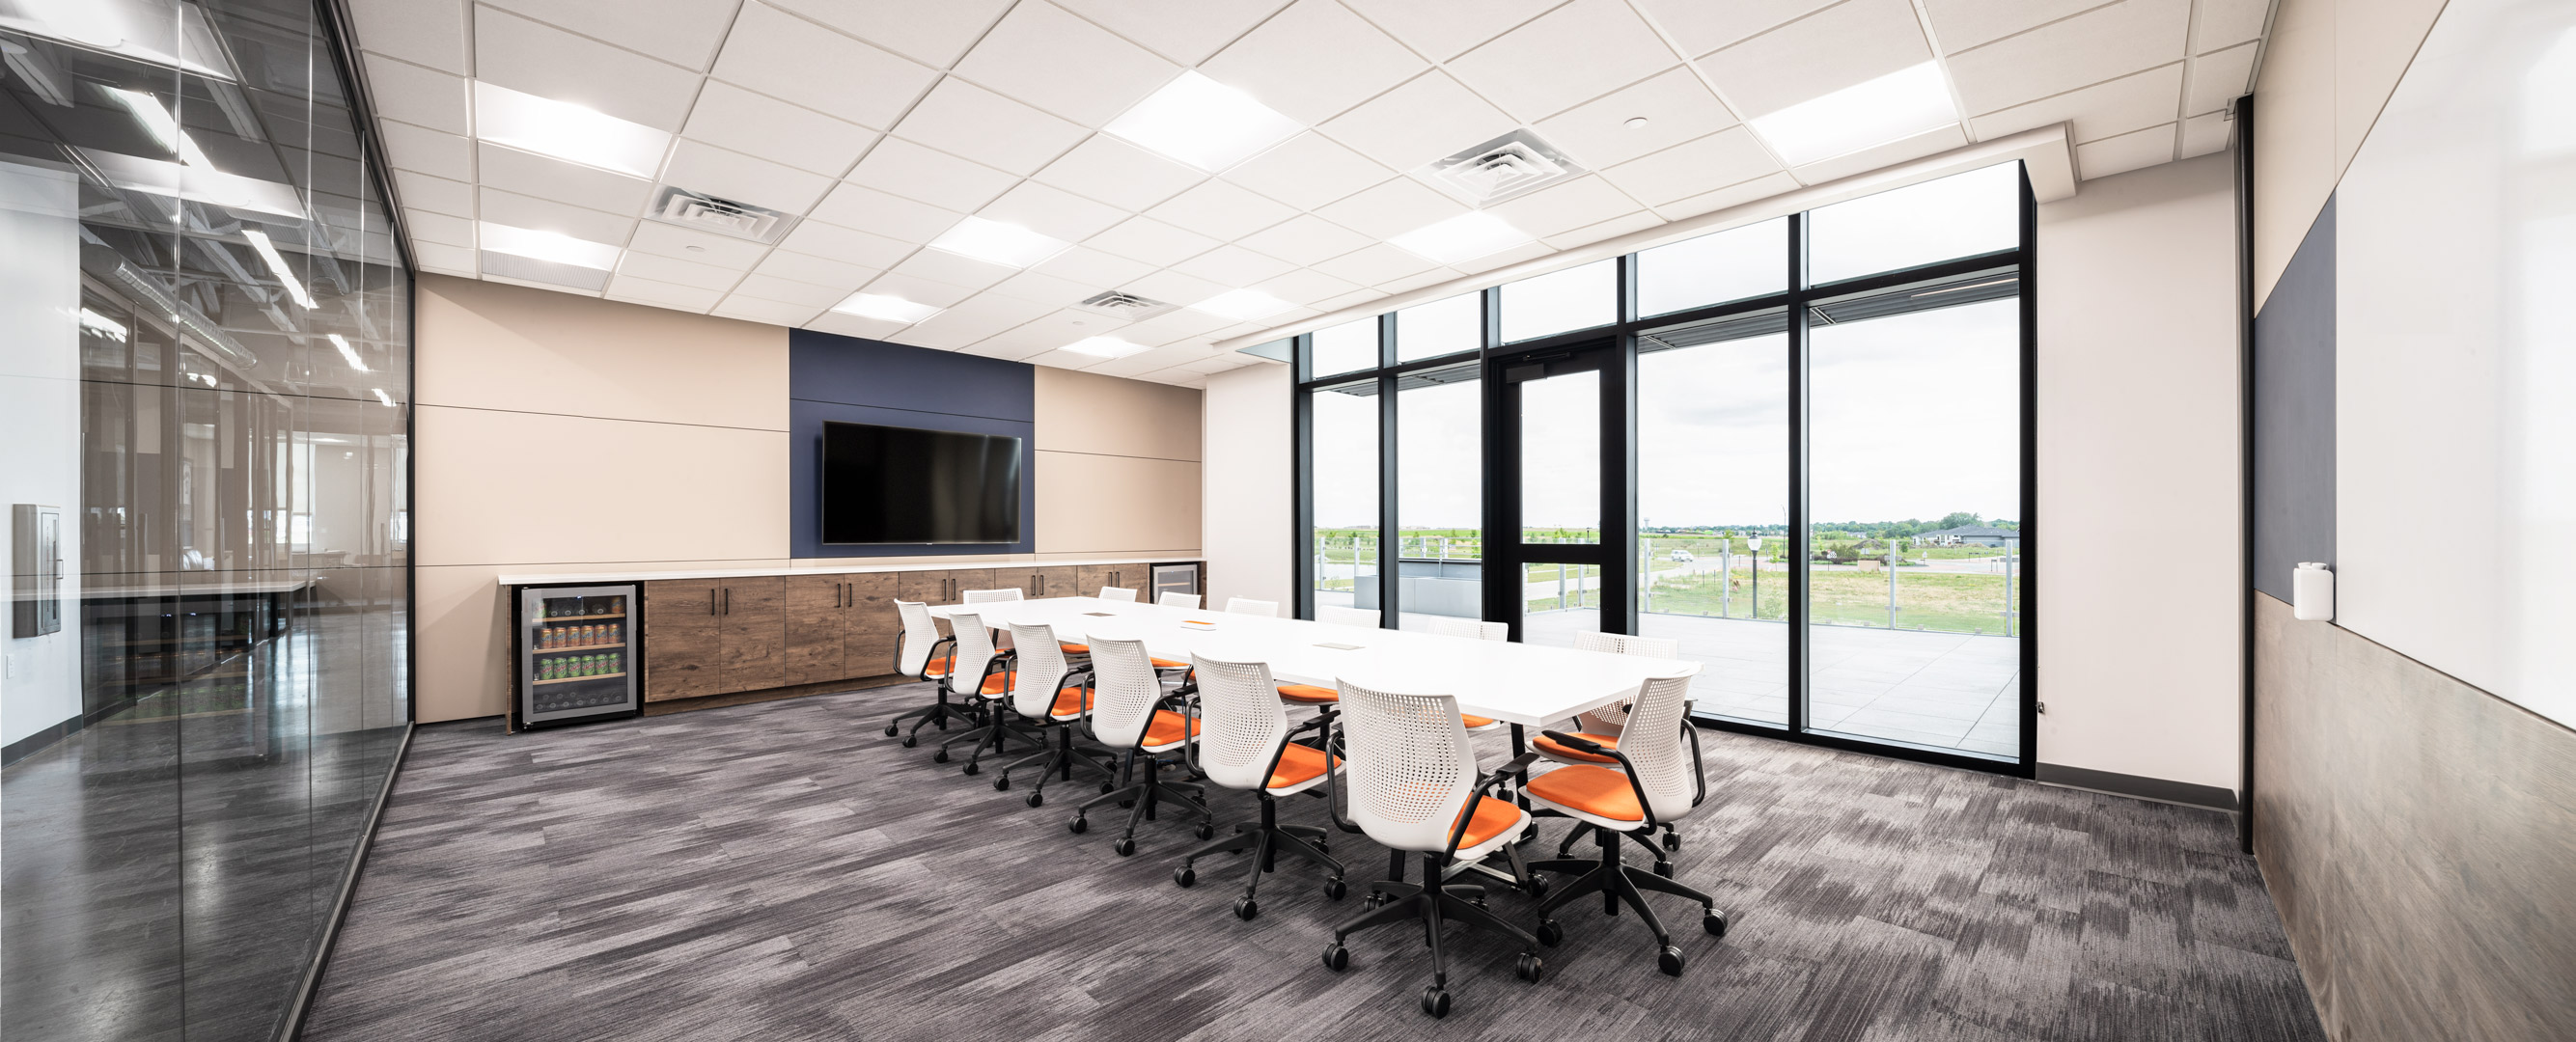 Falkbuilt Des Moines commercial + office solid wall integrated technology